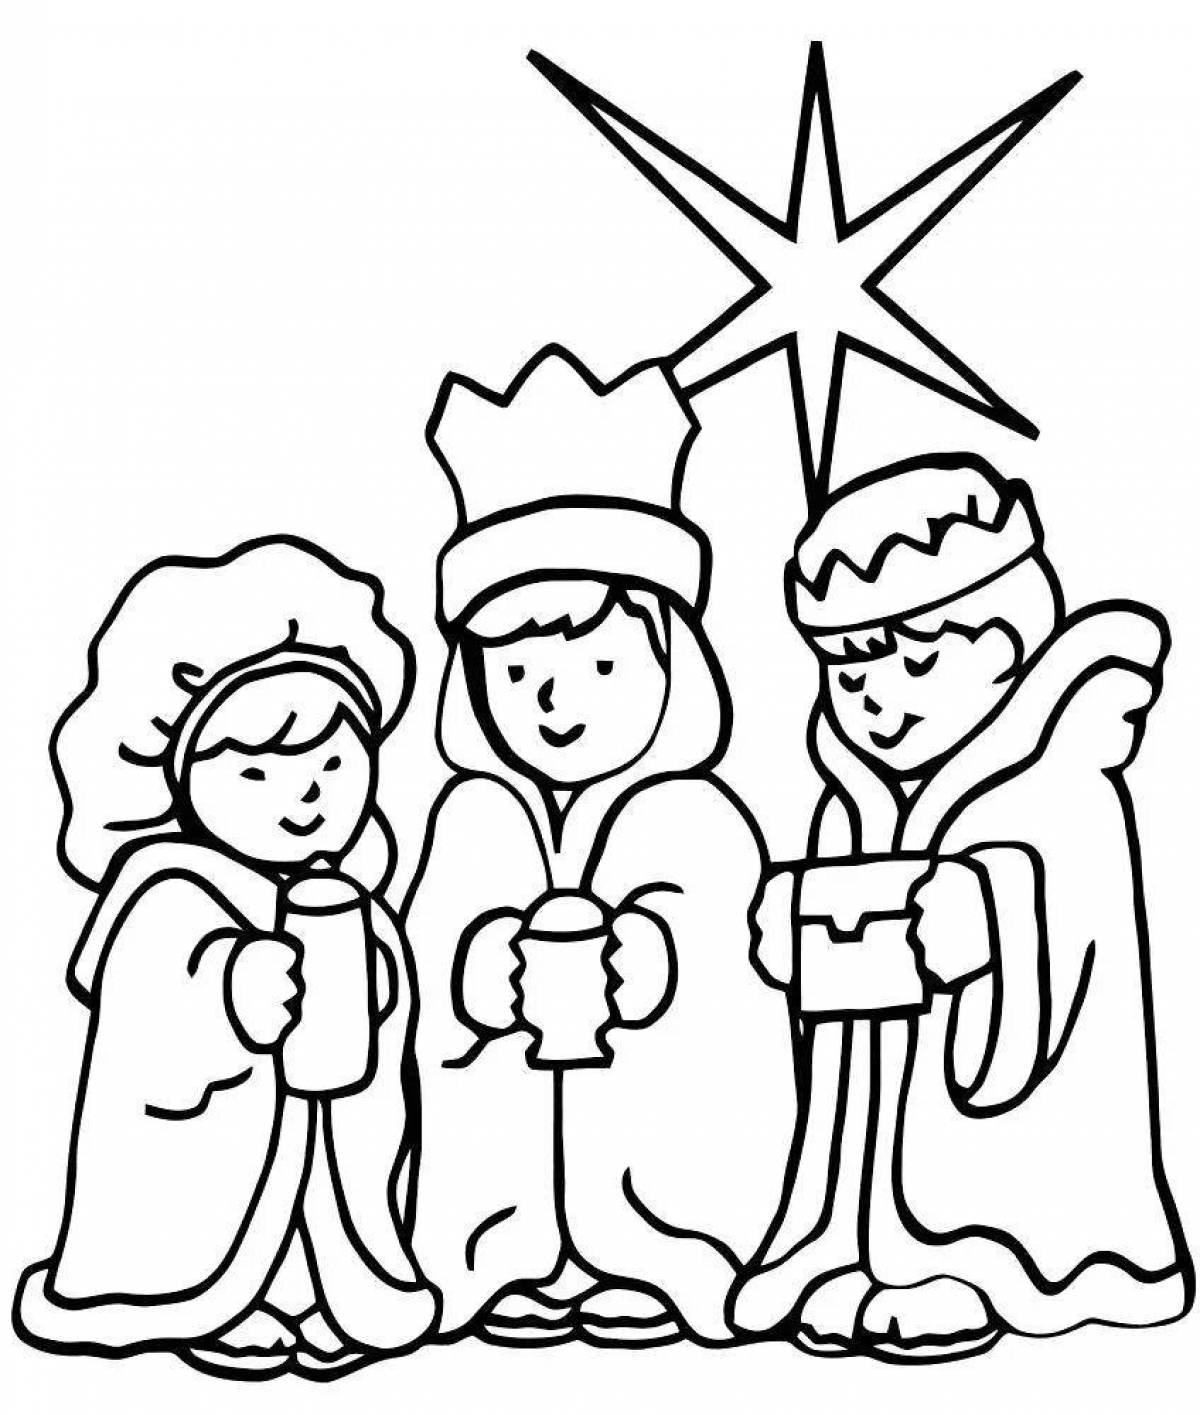 Radiant coloring page carols for preschoolers